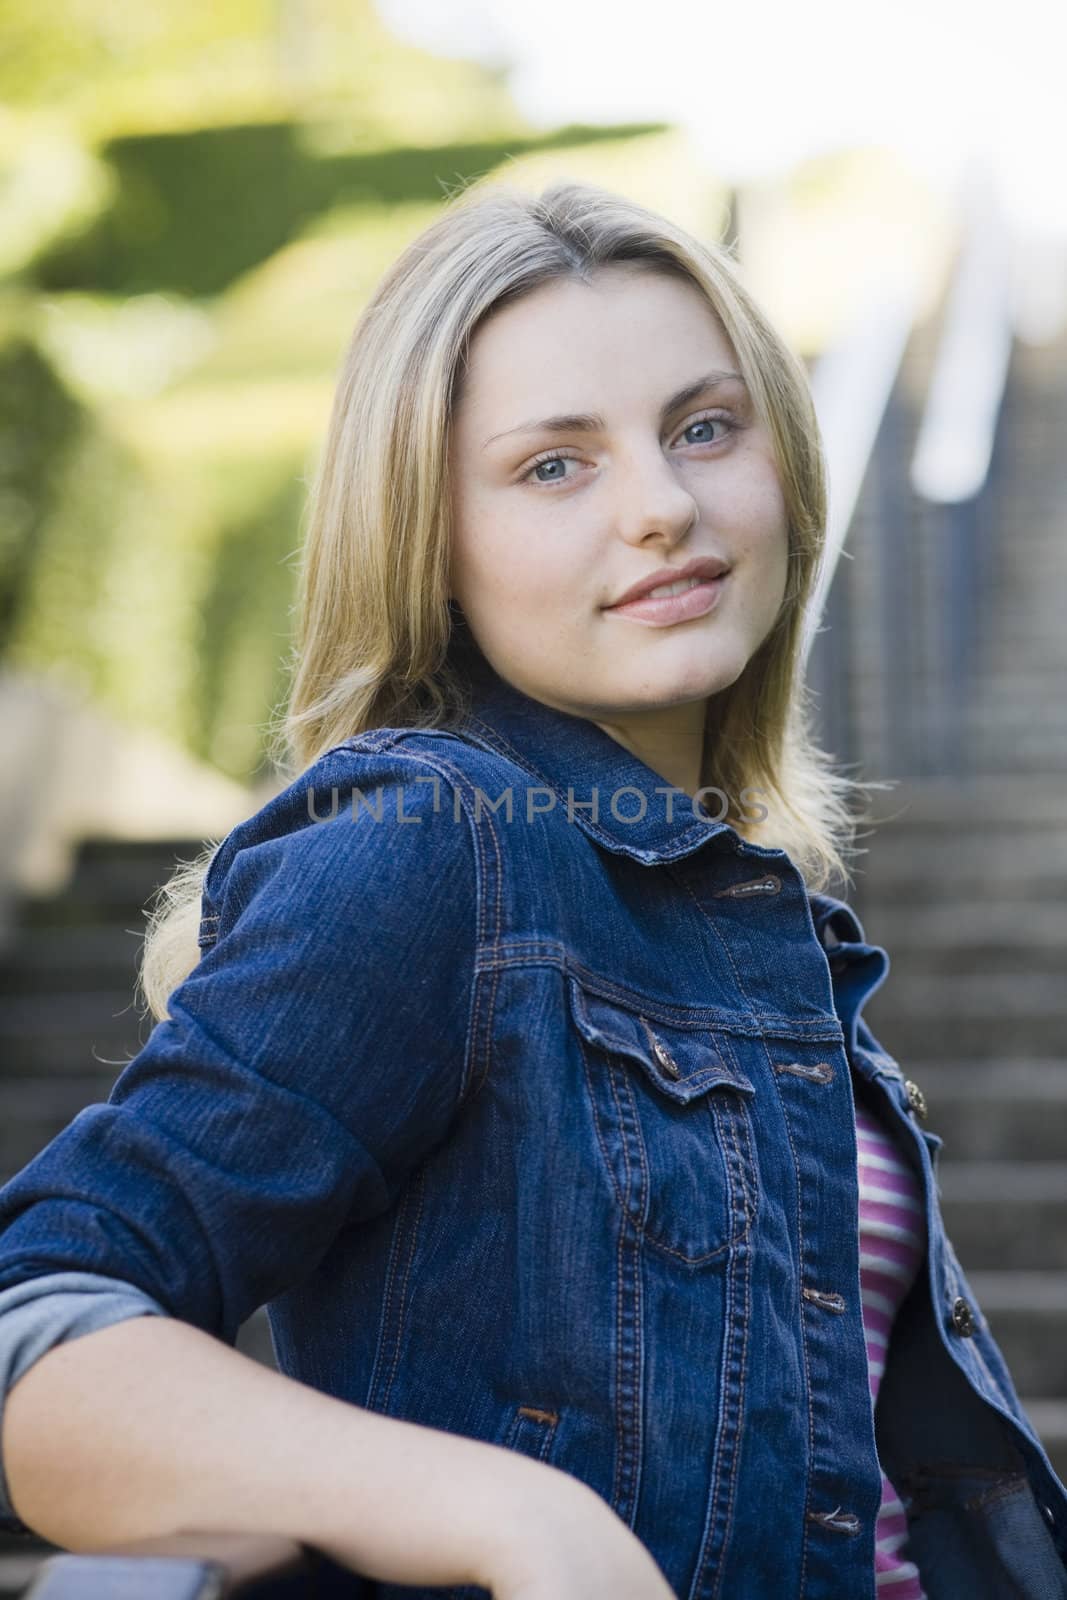 Pretty Blonde Teen Girl Standing on a Stairway Outdoors